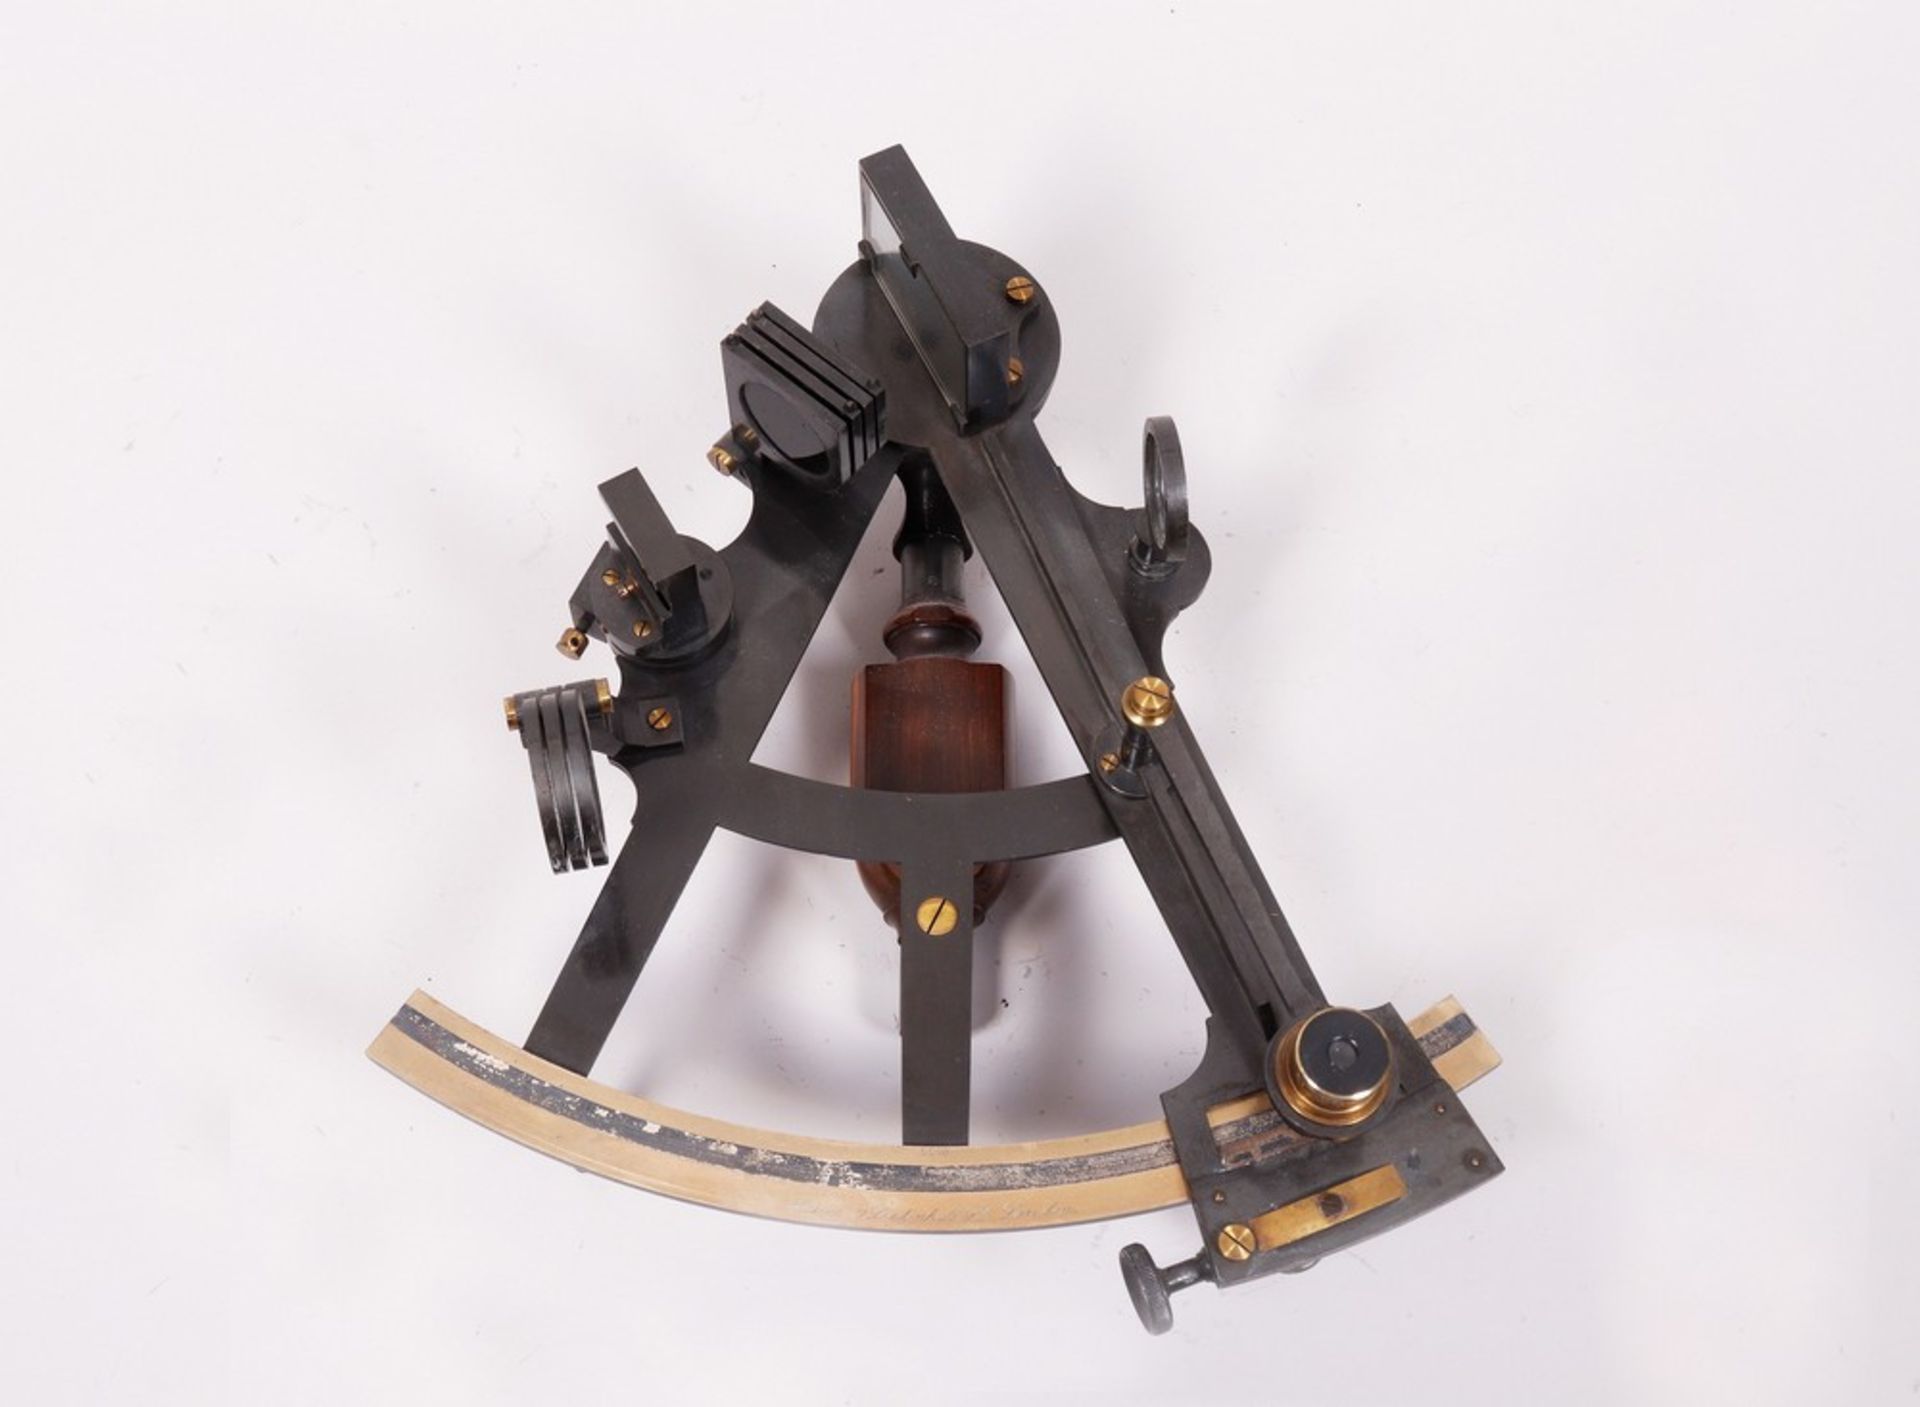 Sextant in transport box, Hawes & Sons, London, 19th C. - Image 2 of 4